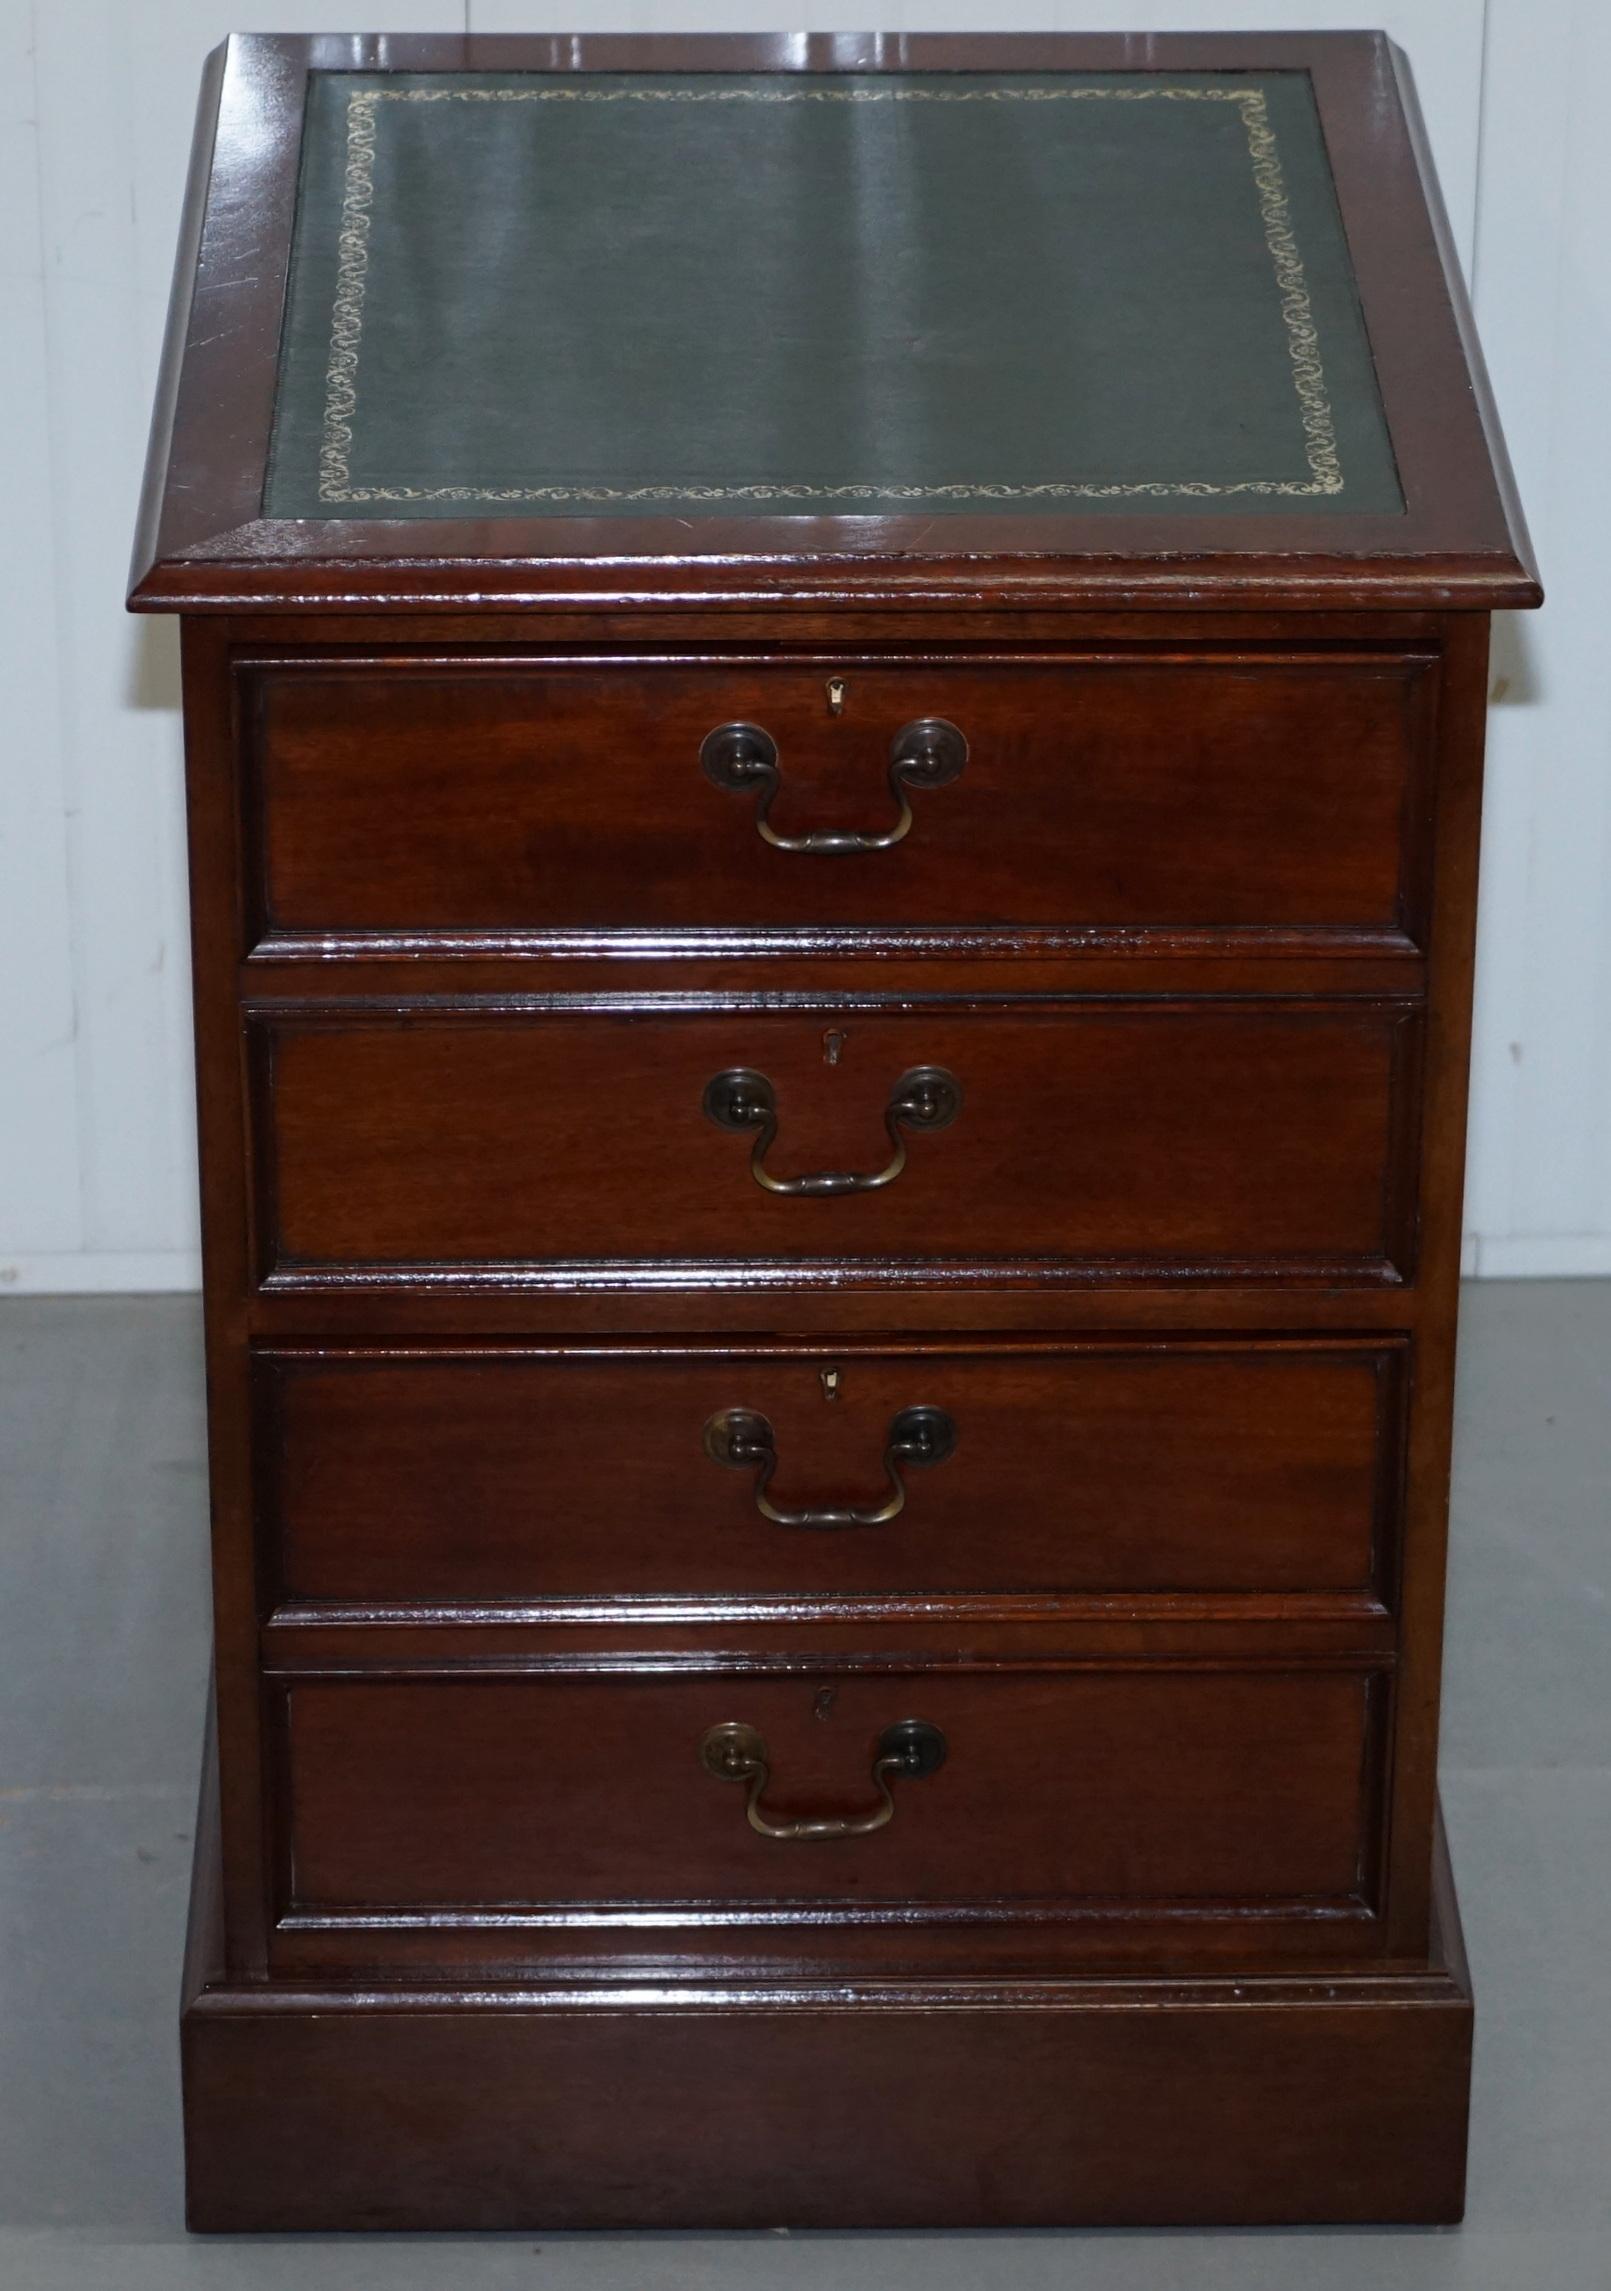 We are delighted to offer for sale this lovely Mahogany with green leather writing surface filing cabinet

I have the matching desk for this filing cabinet listed under my other items

The green leather writing surface is silver tooled and it